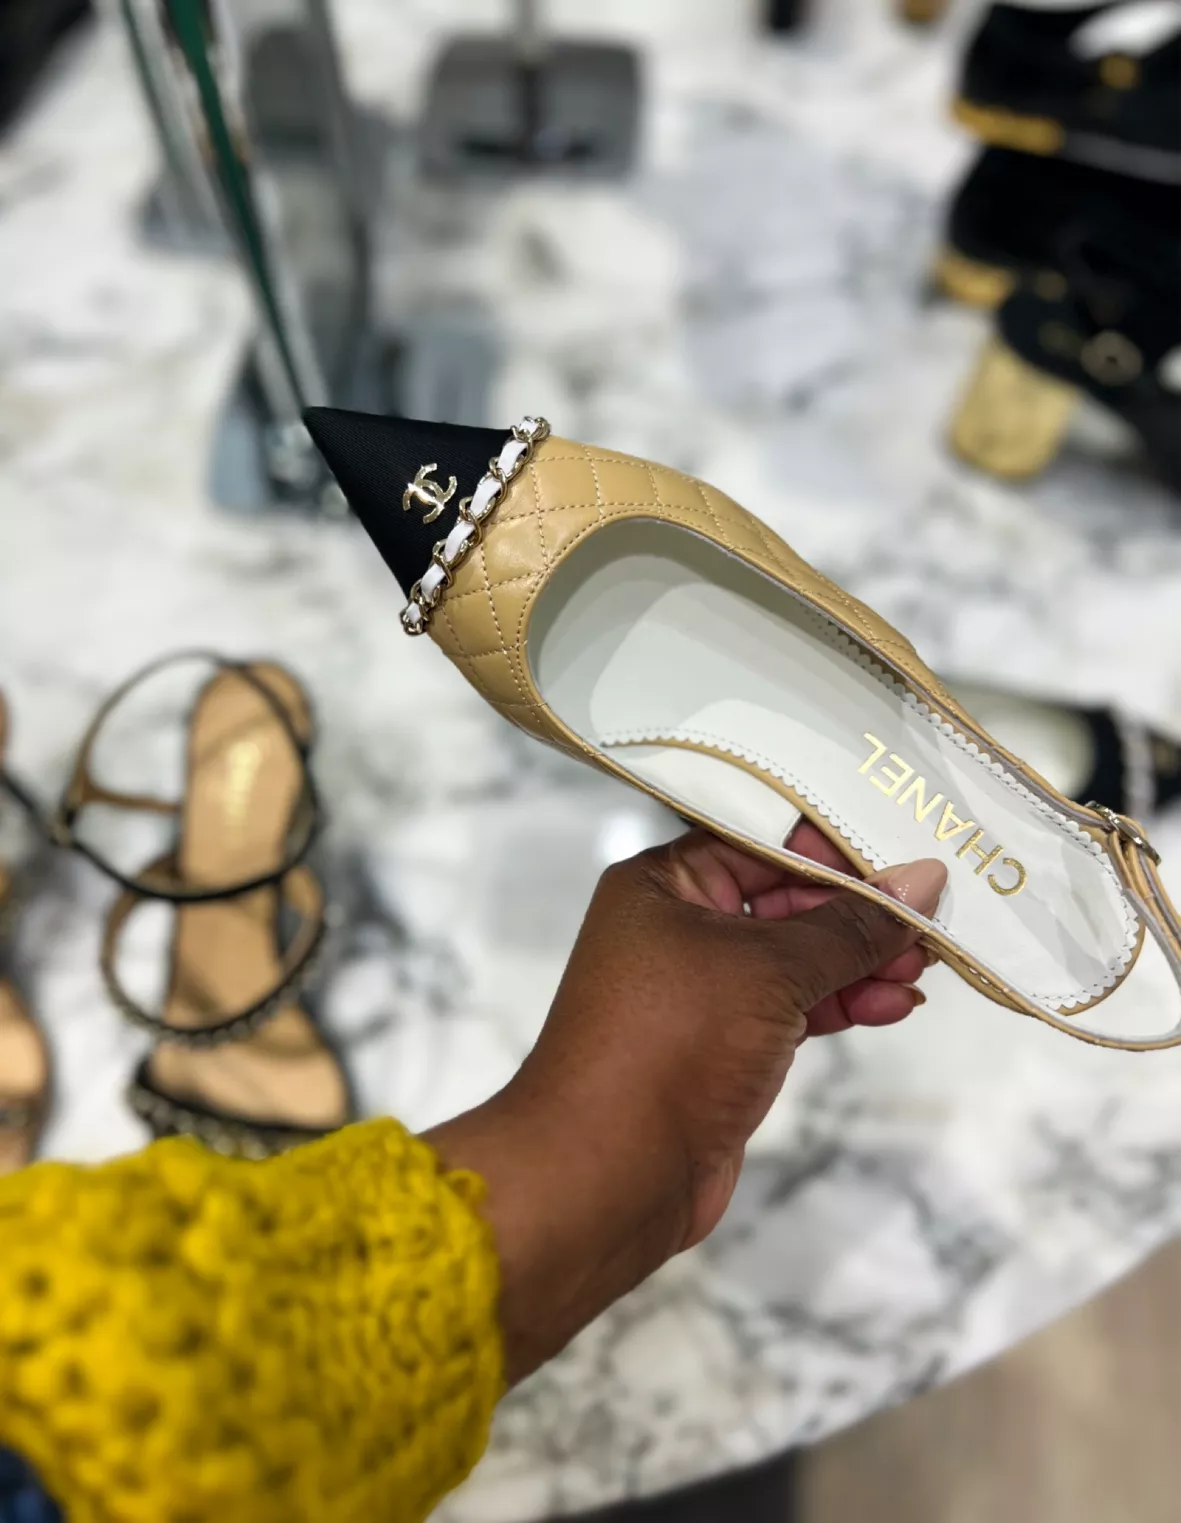 6 GORGEOUS Chanel Slingback Dupes You'll Love